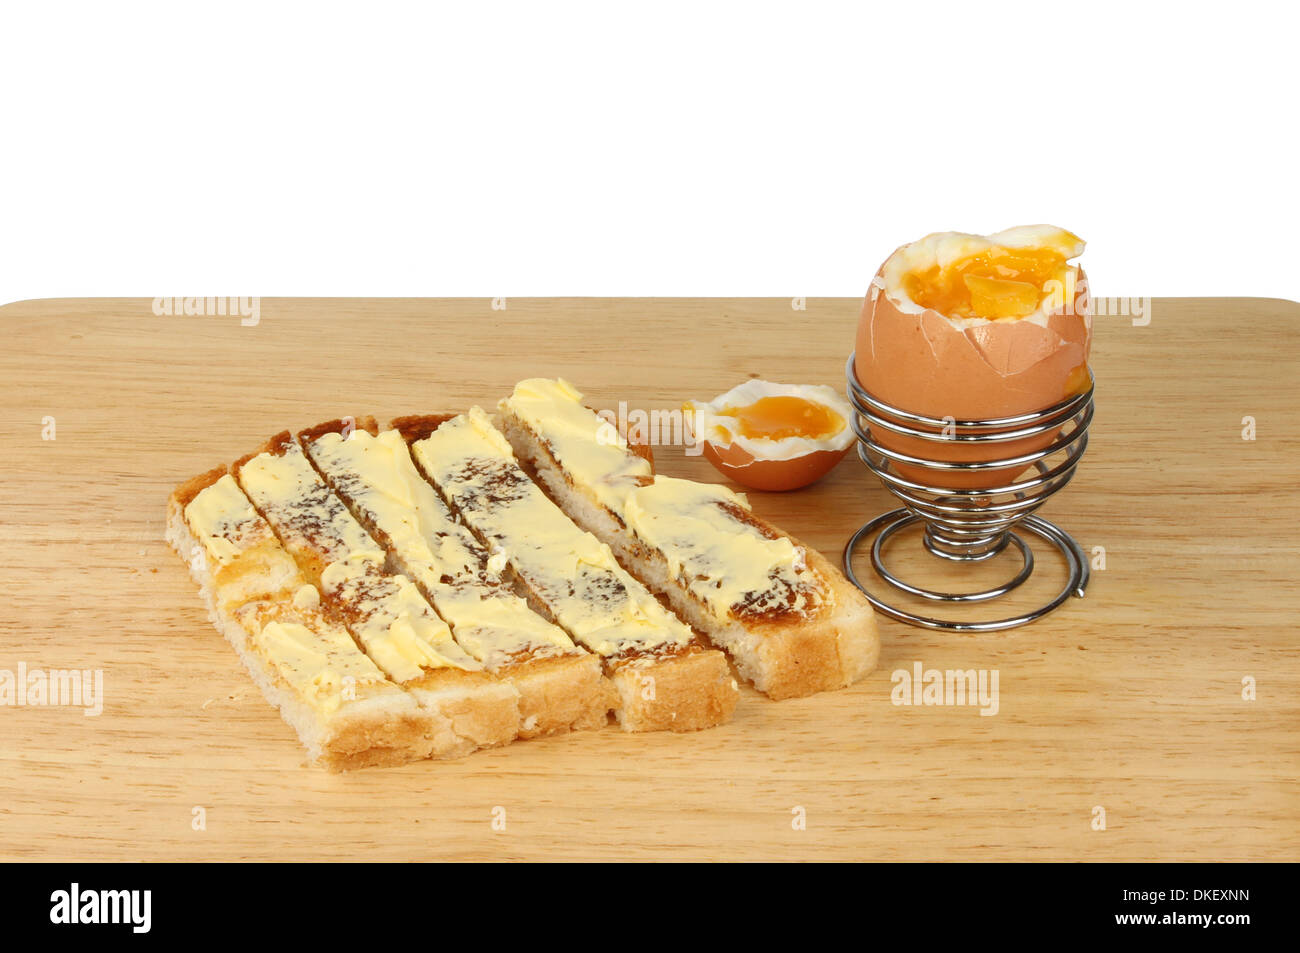 Soft boiled egg and toast soldiers on a wooden board against a white background Stock Photo